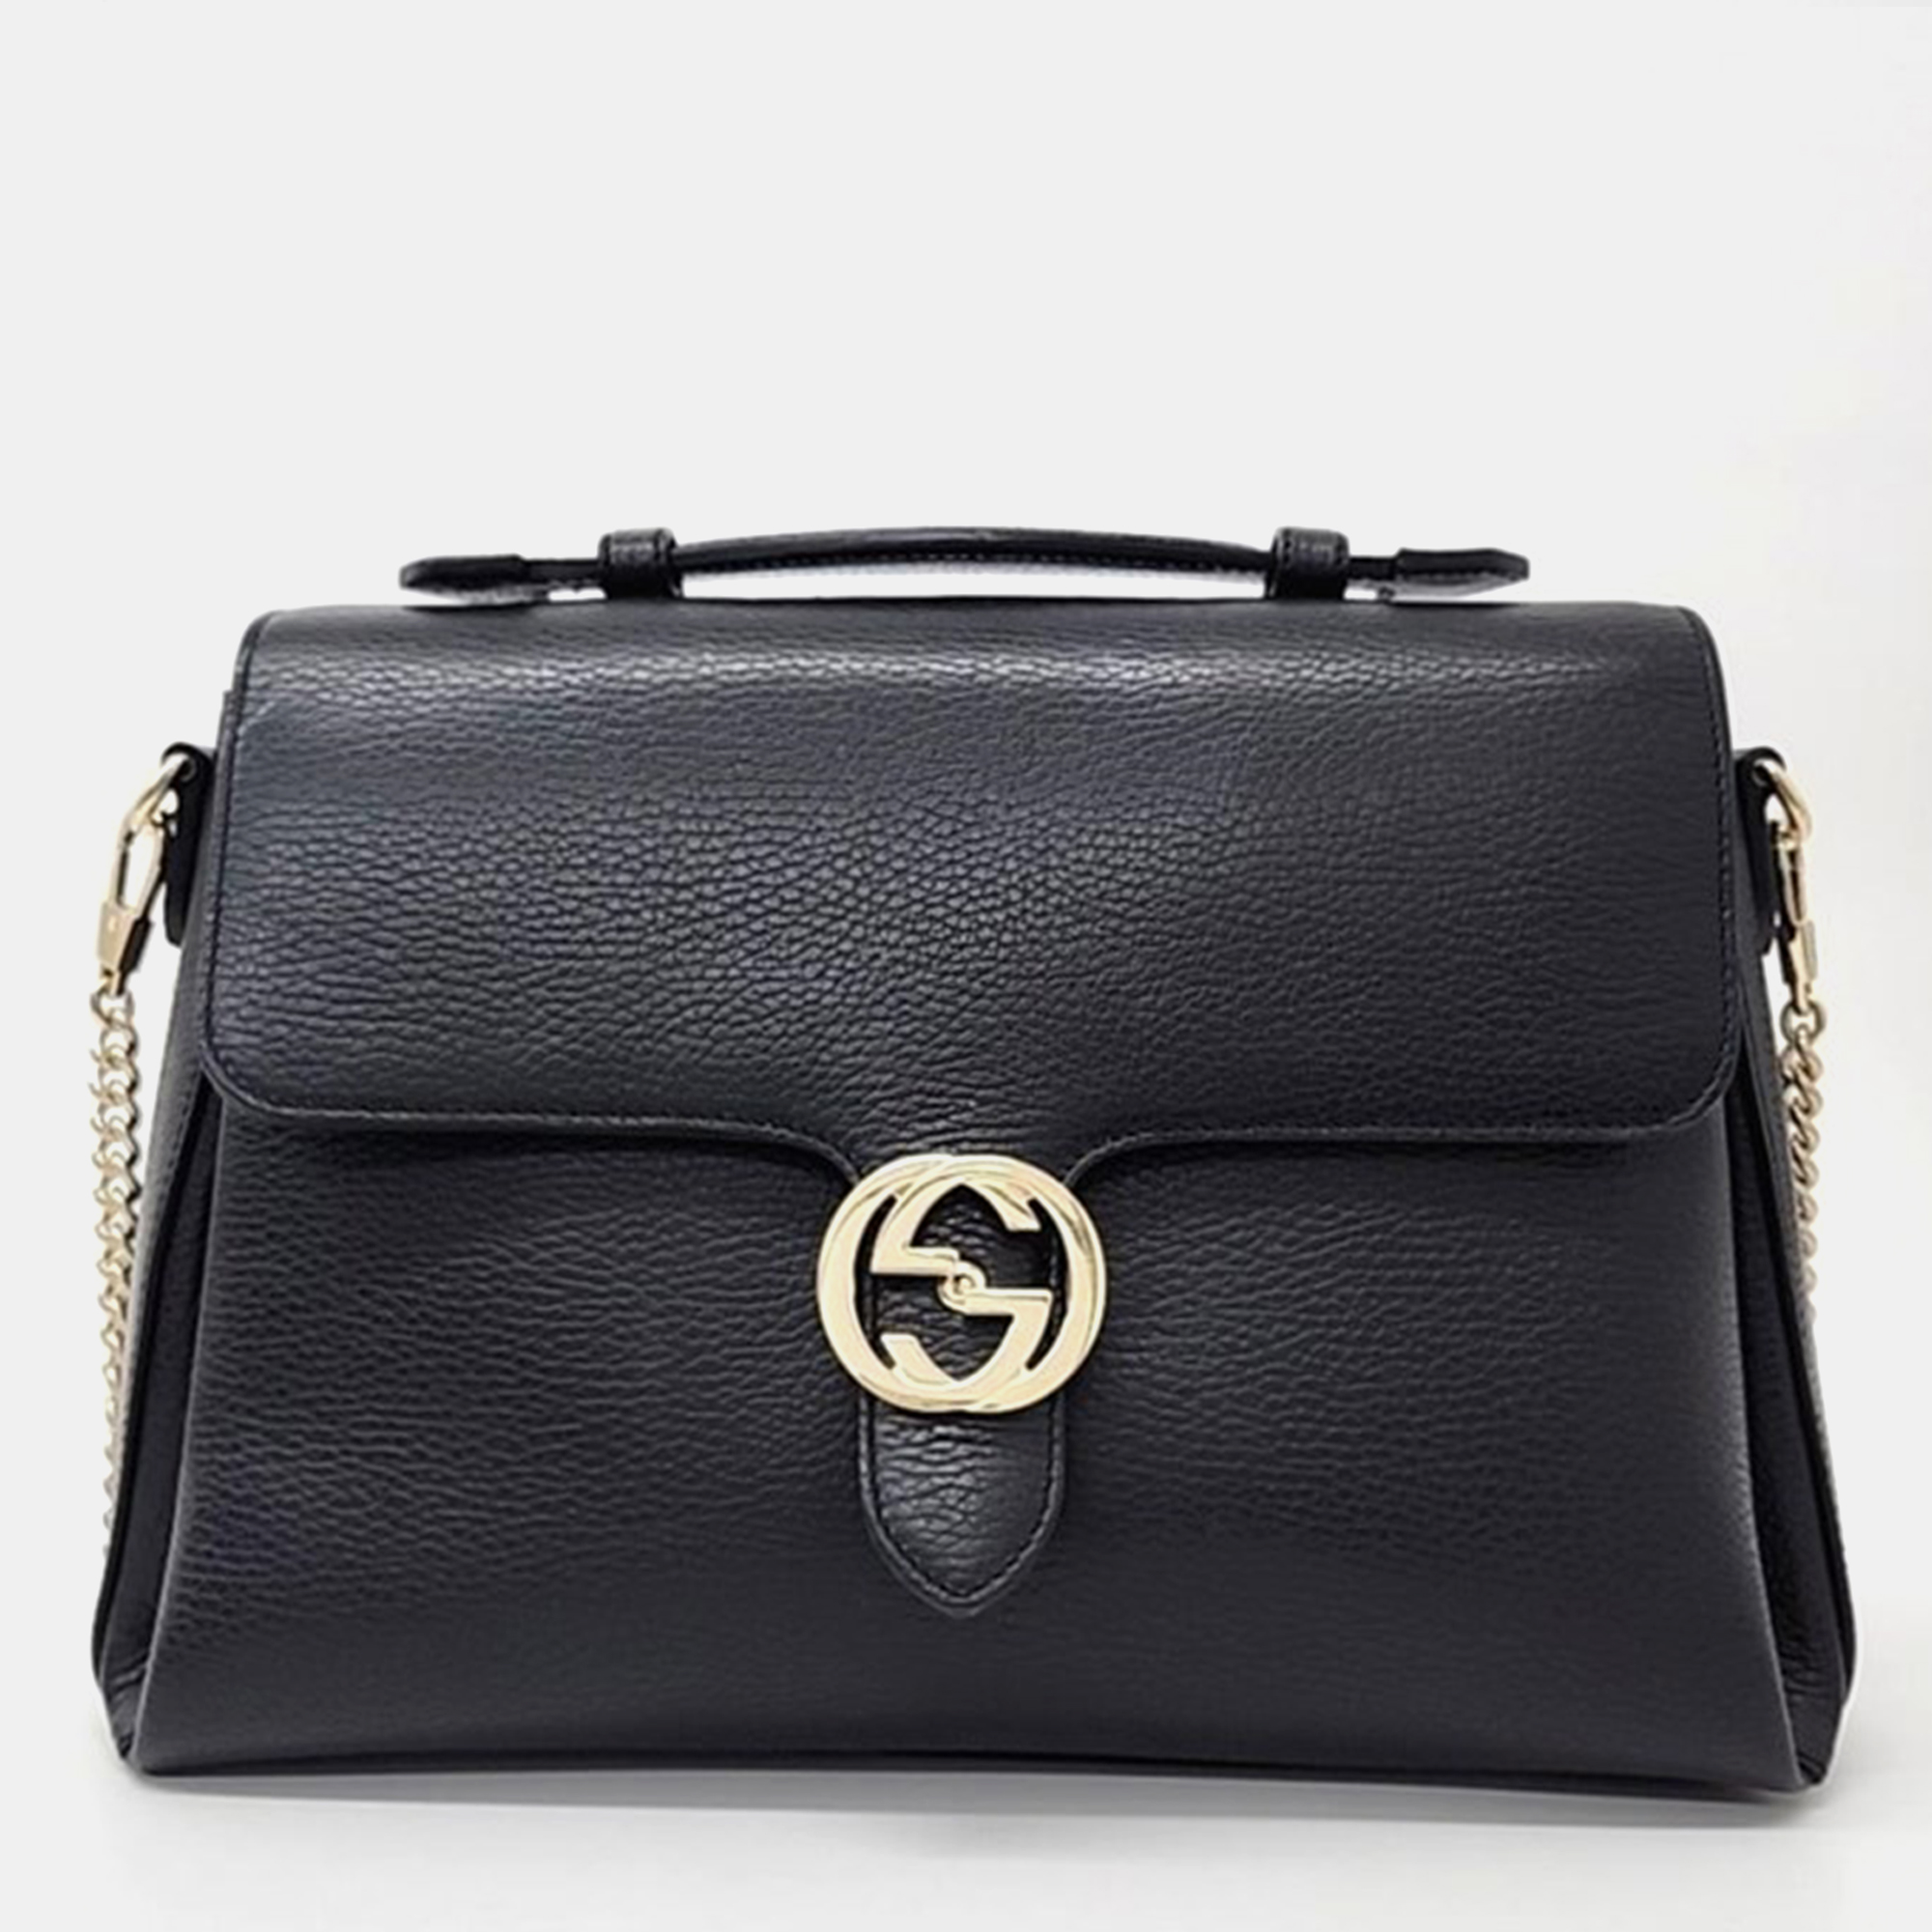 Pre-owned Gucci Black Leather Small Dollar Interlocking G Top Handle Bag